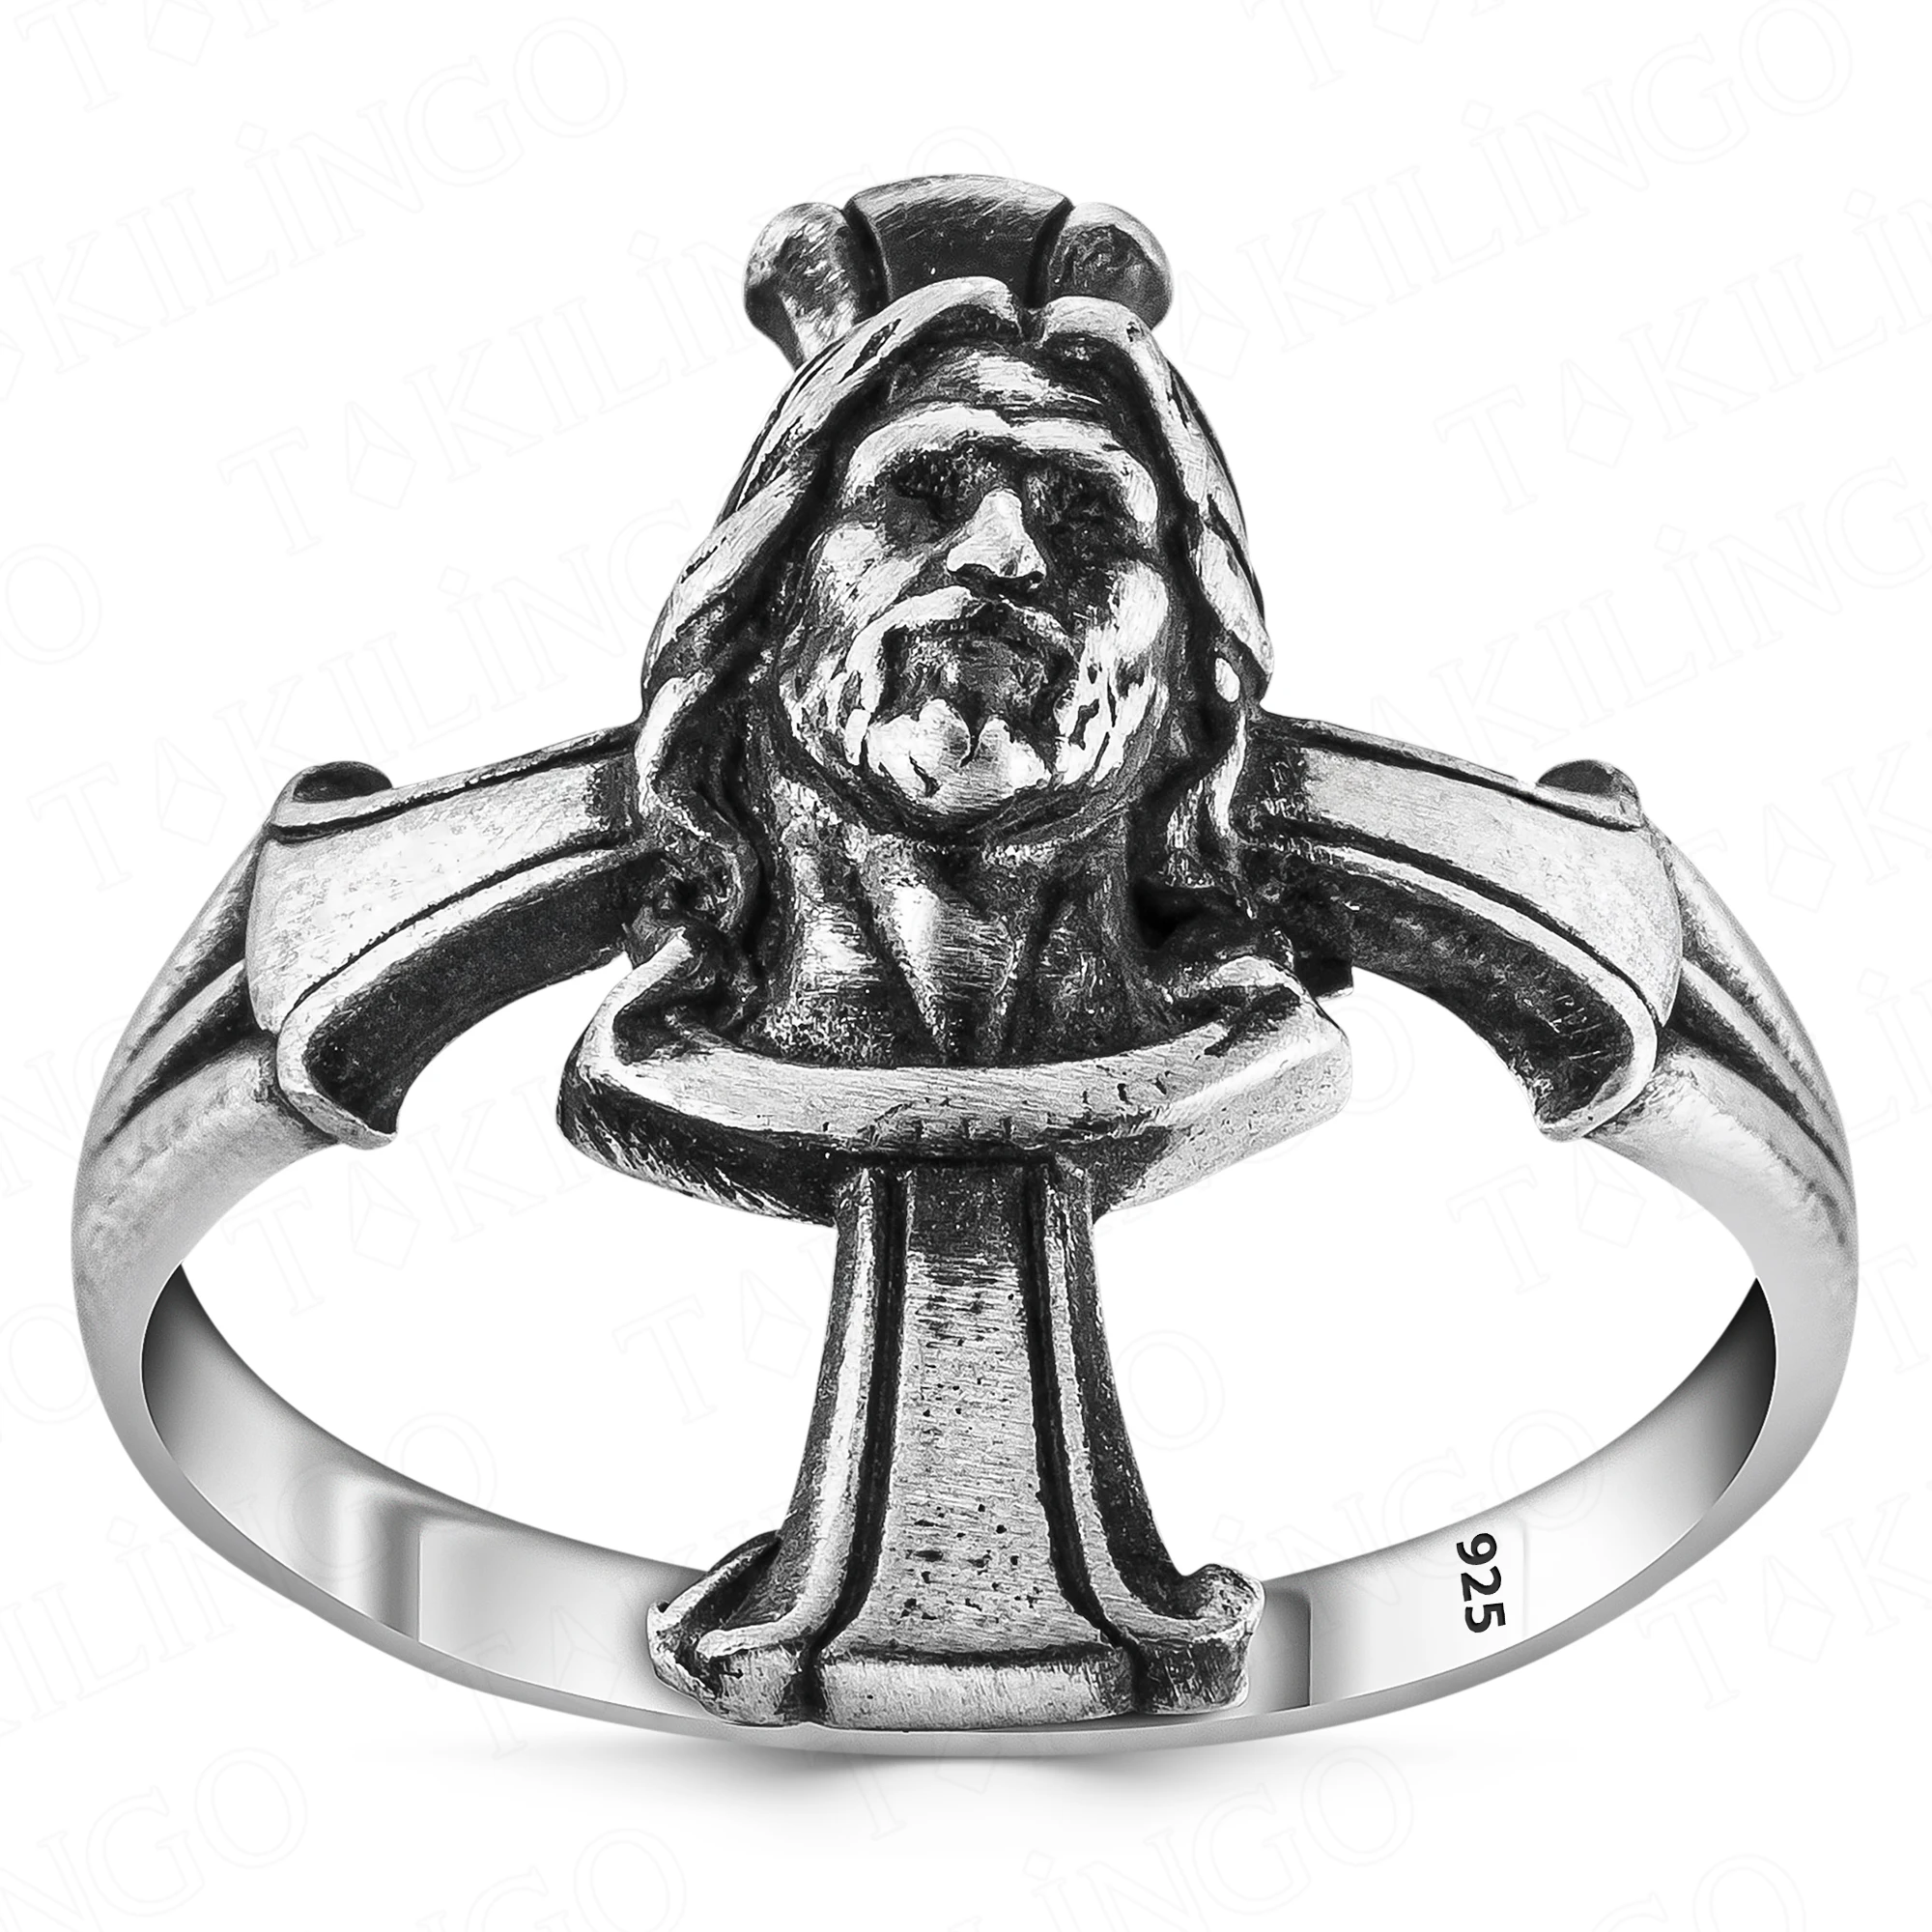 

Jesus Christ Crucifix 925K Sterling Silver Rings Cross Benedict Lords Prayer God Blessing Christian Easter Religious Band Silver